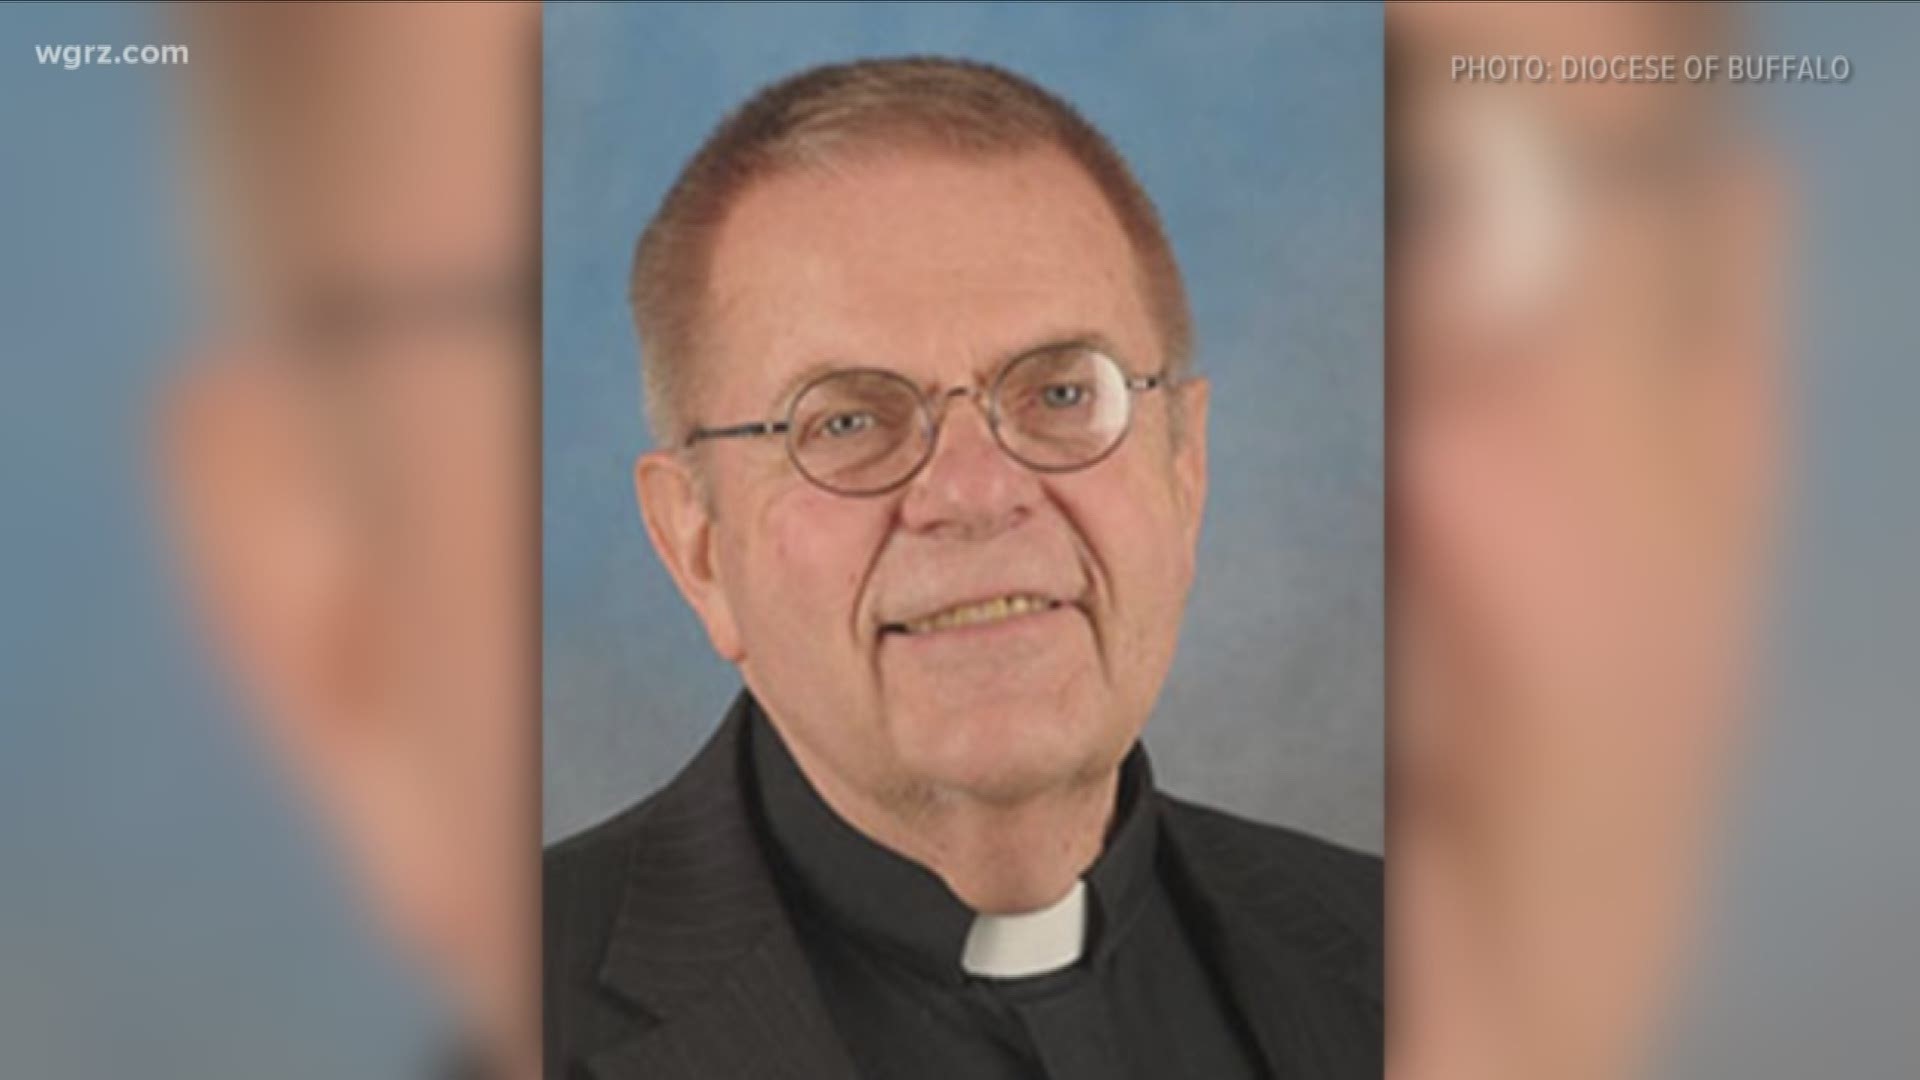 Buffalo Catholic Diocese places another priest on administrative leave following abuse allegation